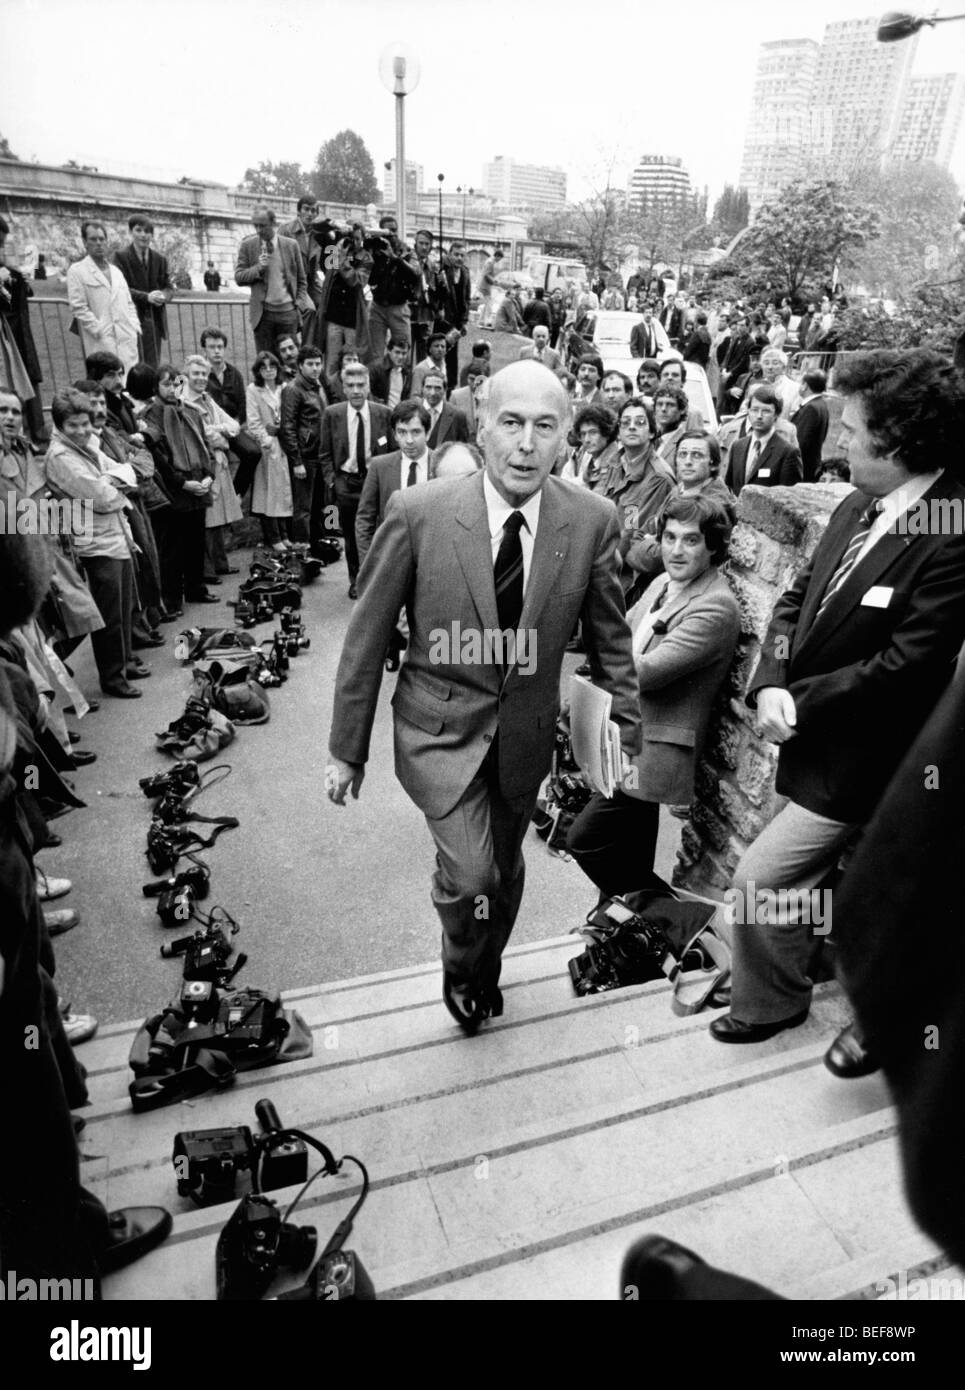 Candidate VALERY GISCARD arriving at the Radio House in Paris Stock Photo